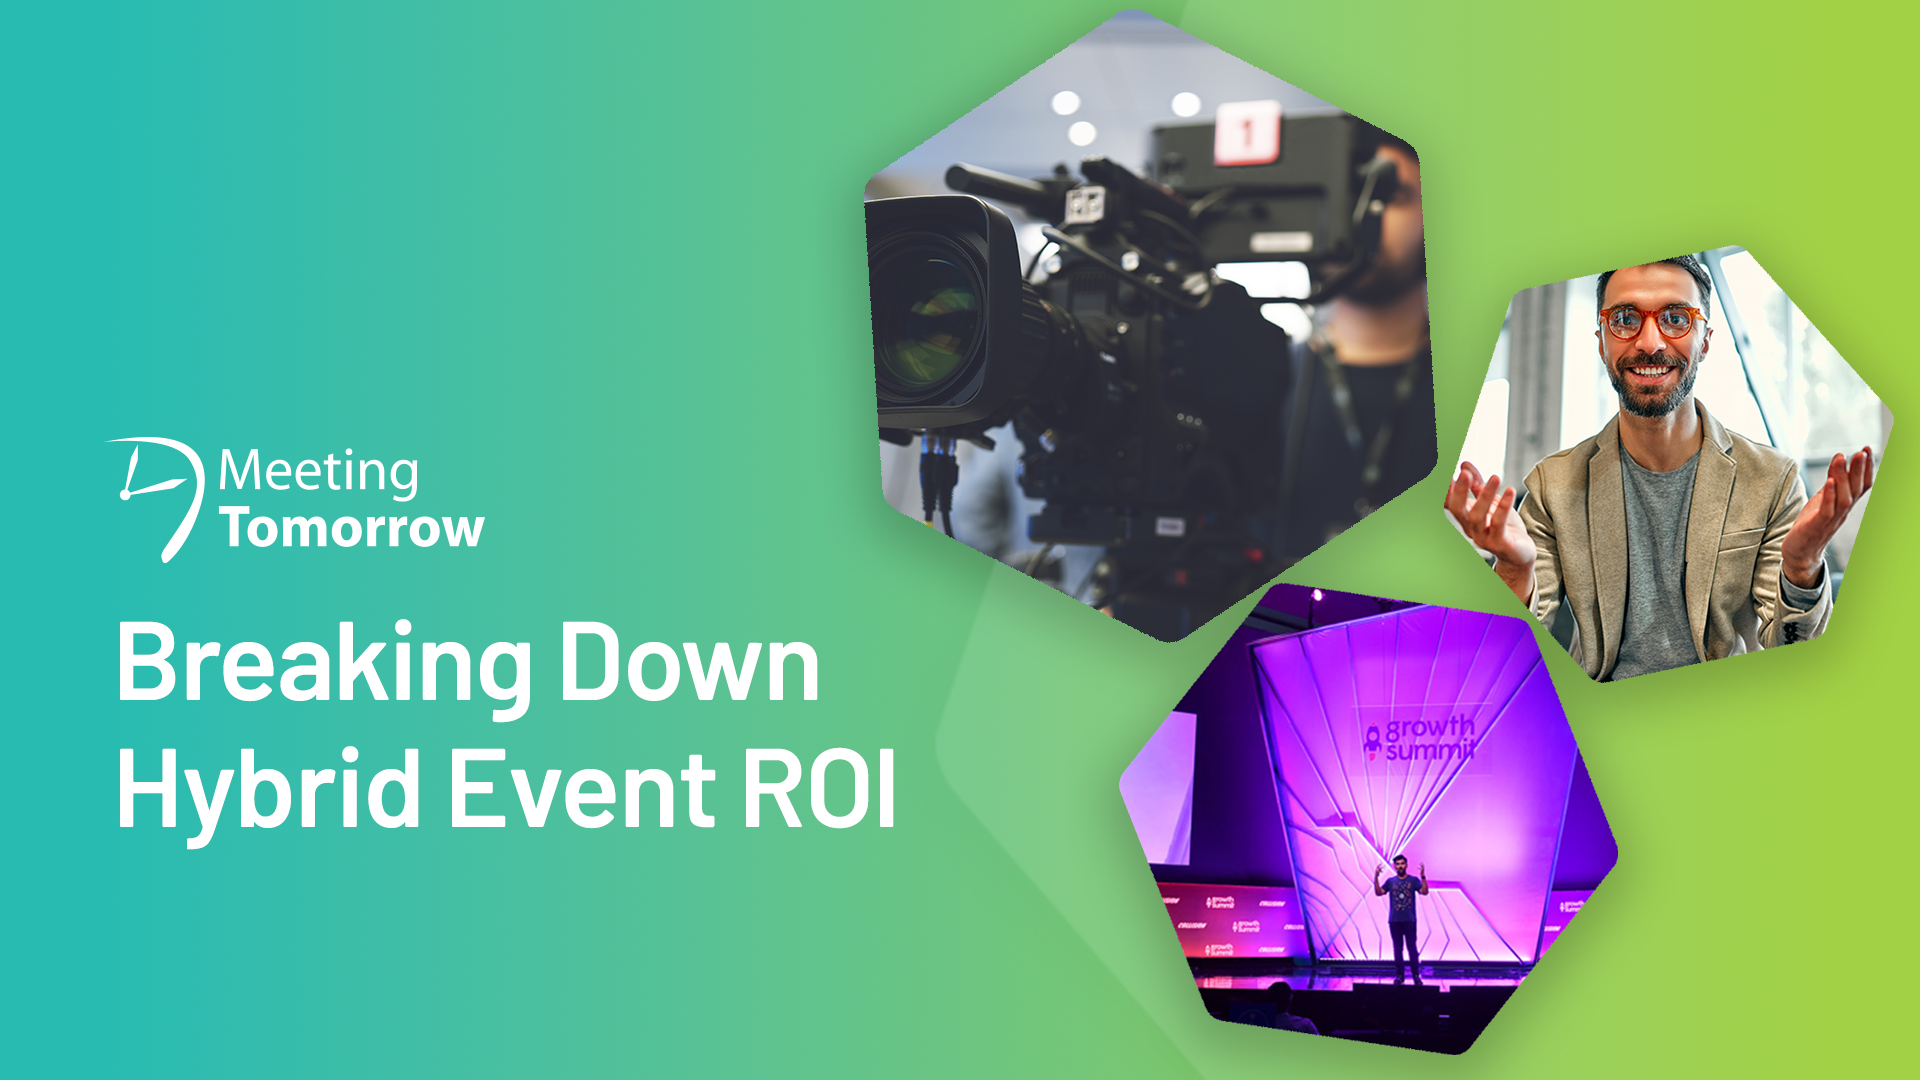 breaking down hybrid event roi with meeting tomorrow